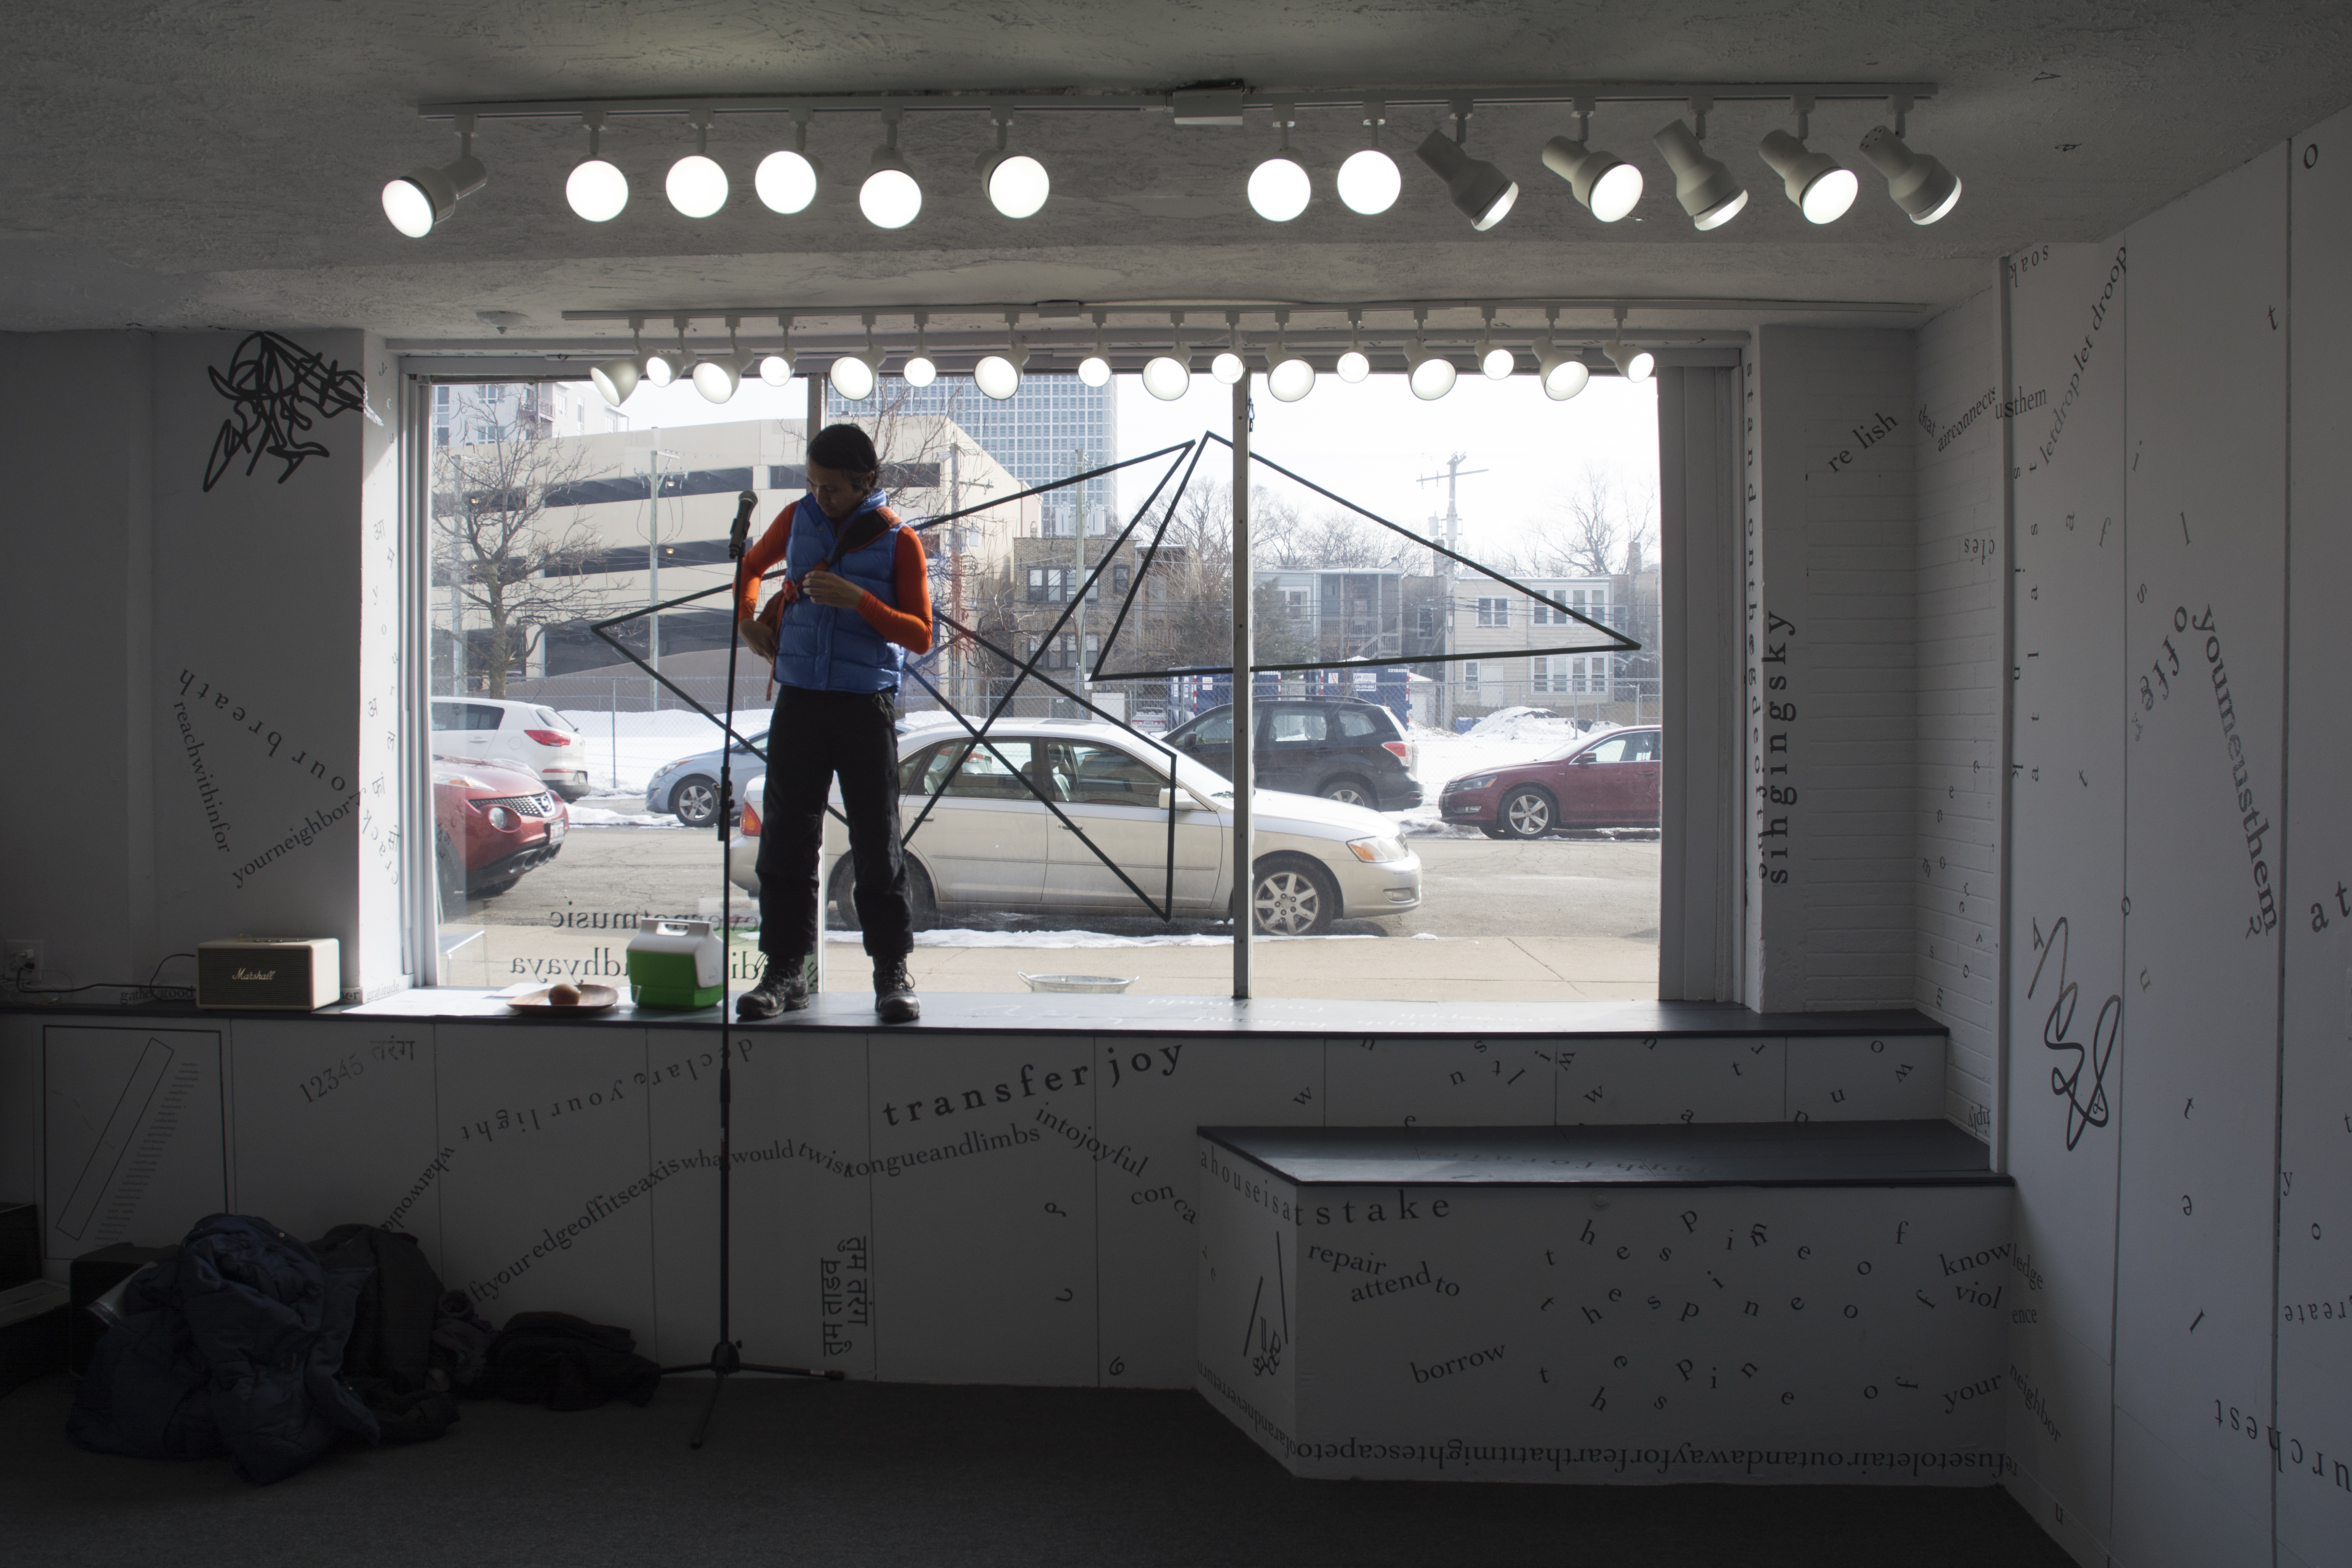 The photograph is a long shot of the inside of the gallery, with the large front window in the background and, beyond that, cars and buildings outside. A performer stands in the windowsill. Around the performer, on the sill or the floor, are a thermos, a microphone on a long stand, and a pile of cloth. Above the performer is a line of track lights that face the camera, in addition to the daylight coming in from outside. Black vinyl letters are installed directly onto the white gallery walls, in the form of words and phrases in English and Hindi. Text appears in different sizes and spatial orientations (e.g., right-side up, upside-down, diagonal, vertical, and organic shapes), with some words/phrases expanded in space, condensed, or intersecting with other text. Gestural drawings—also made of black—are shown on the top left-hand side of the image.